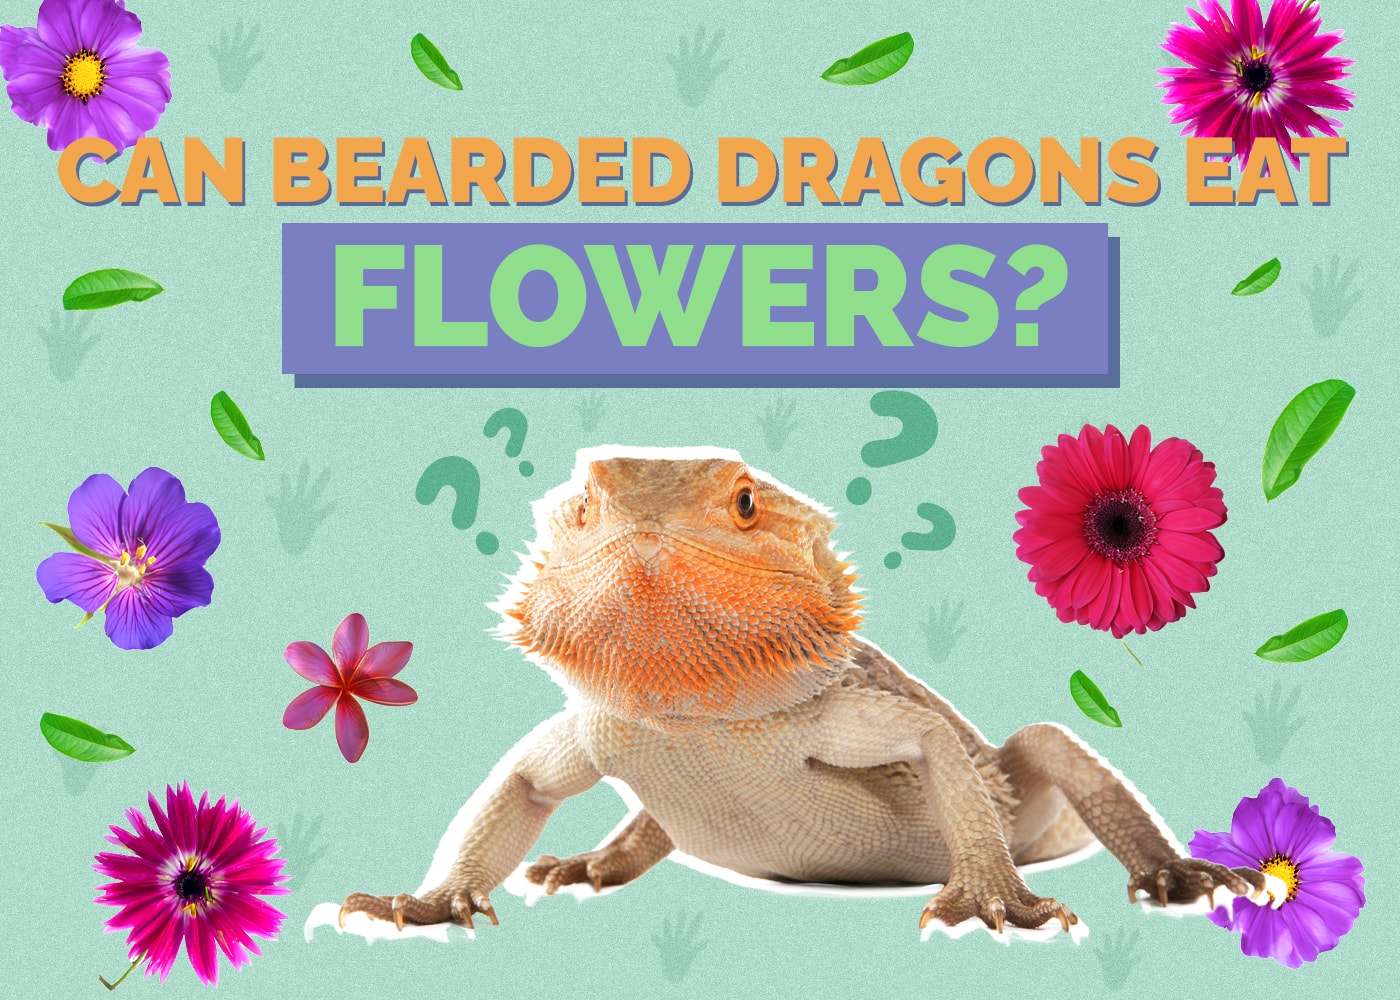 Can Bearded Dragons Eat Flowers